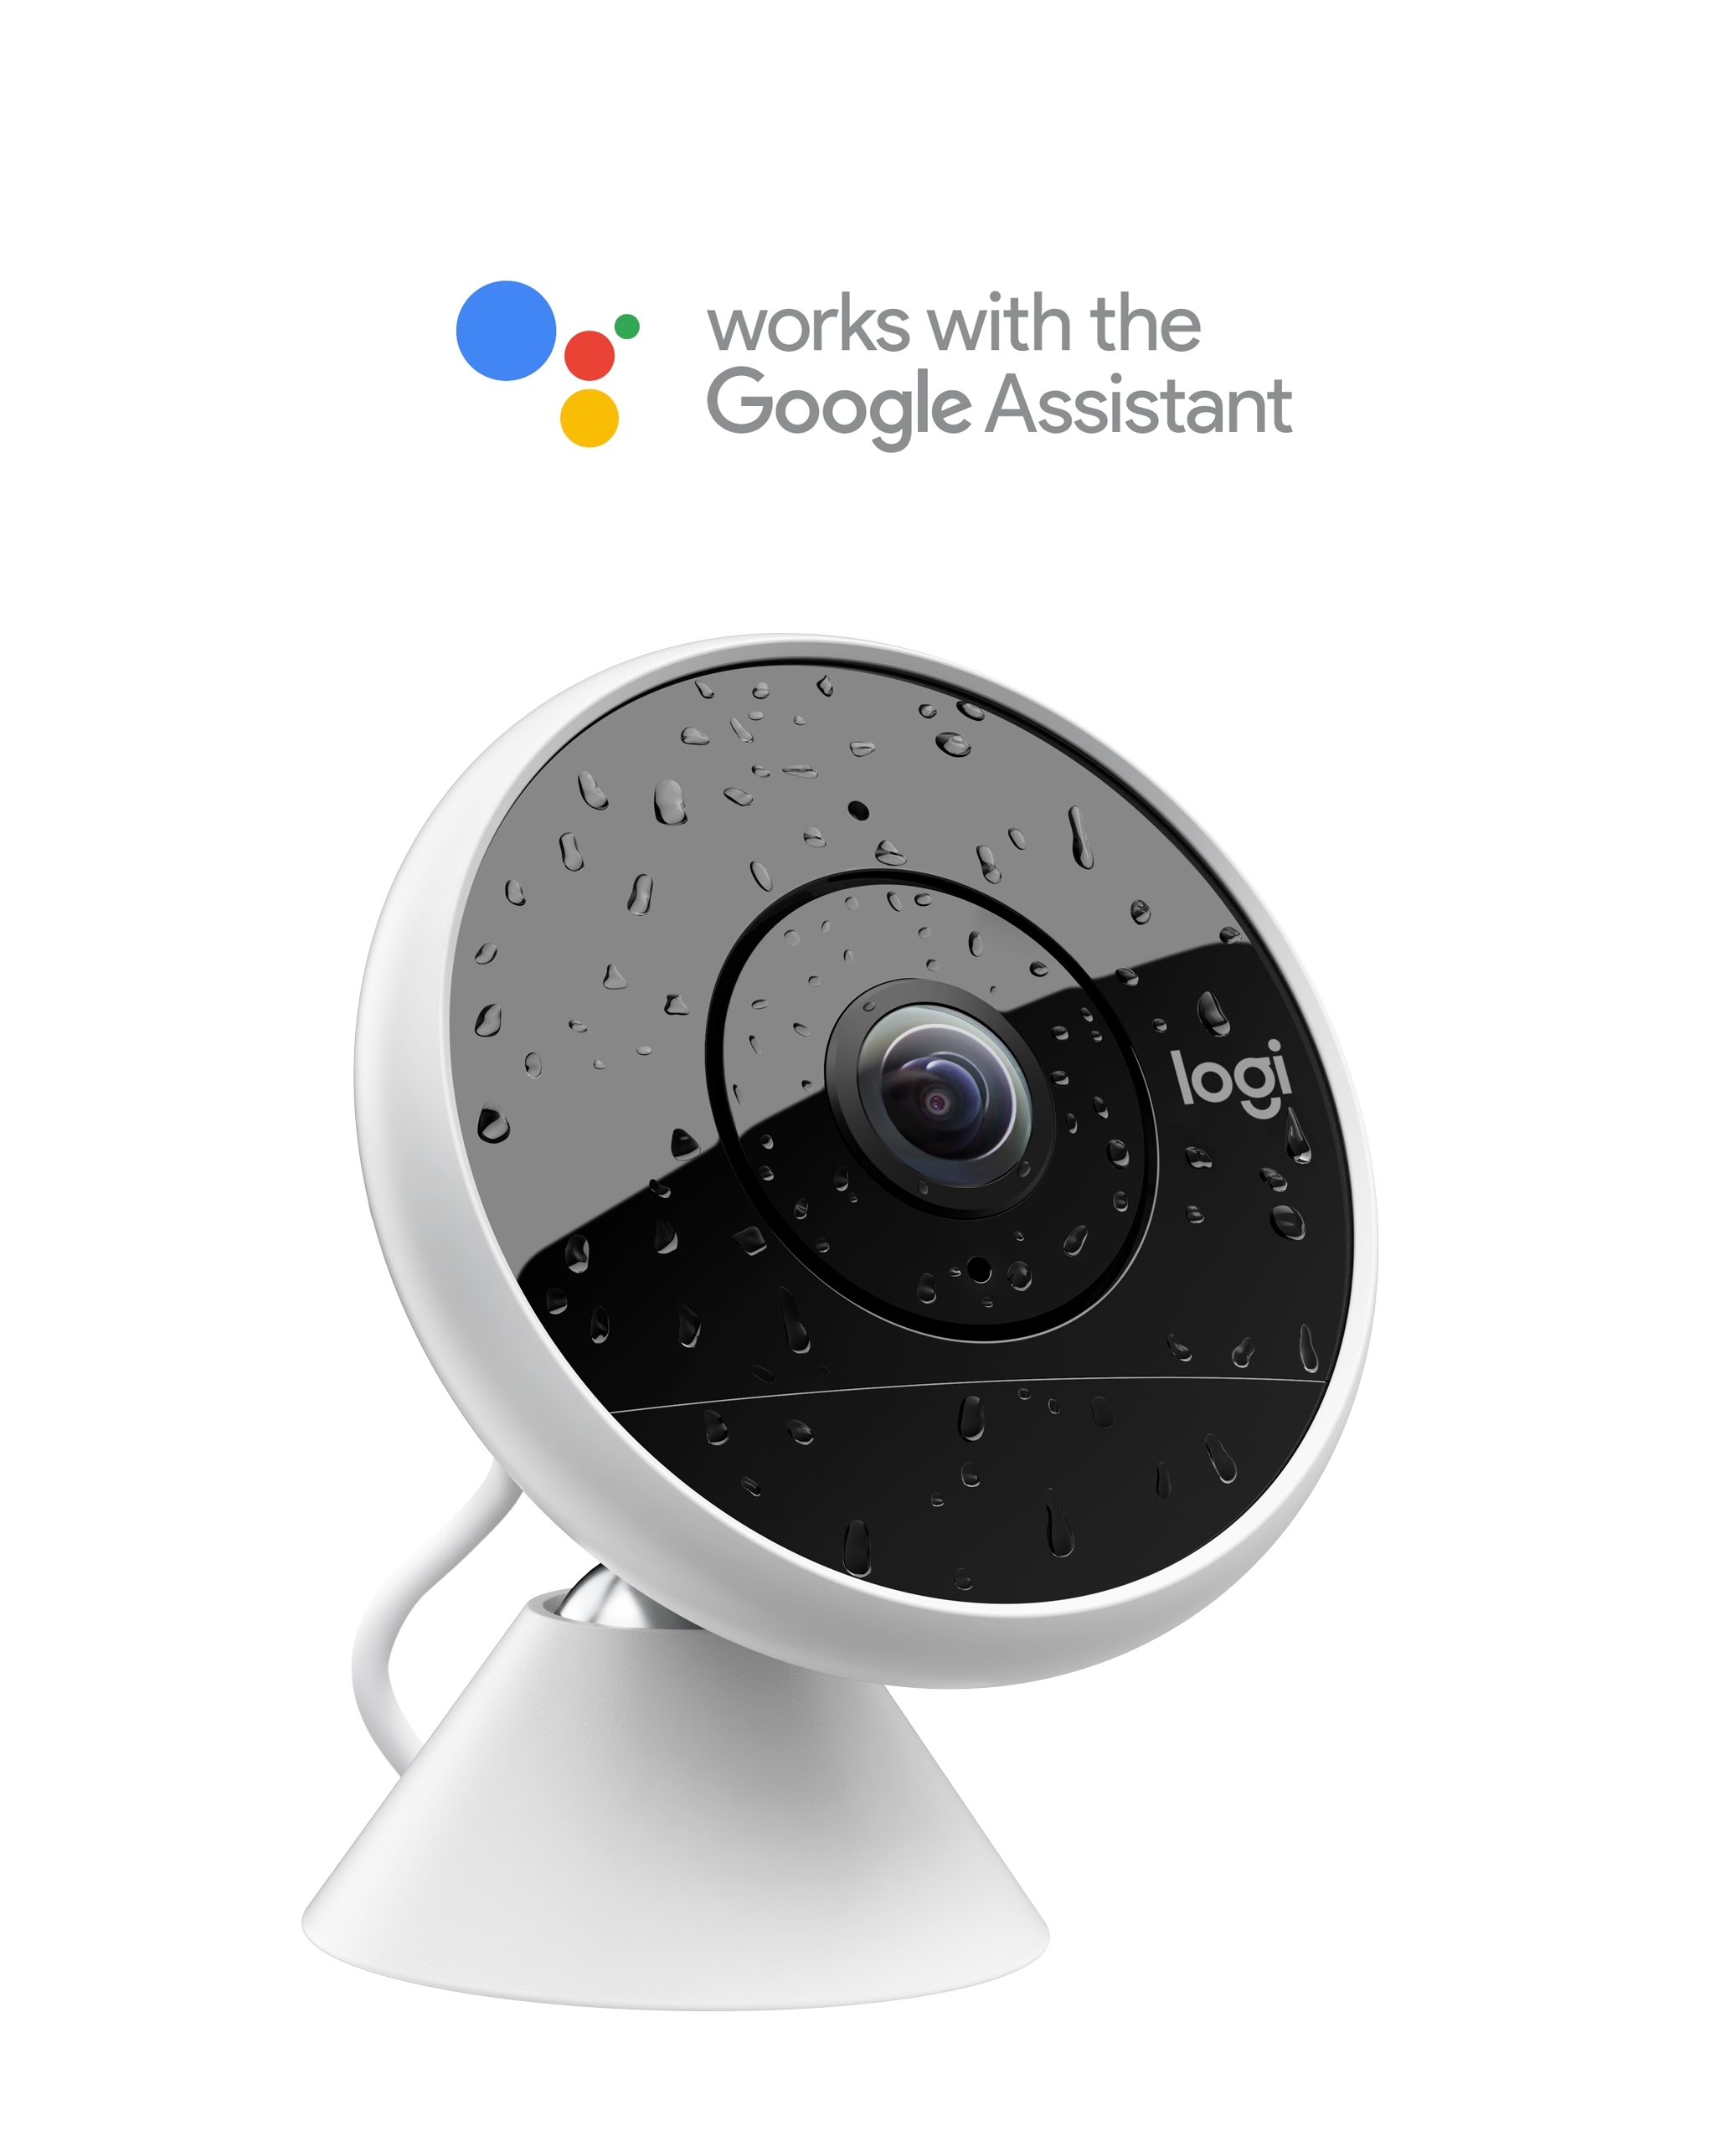 Voordracht banjo stikstof Logitech Makes Home Security Smarter with the Google Assistant Integration  | Business Wire